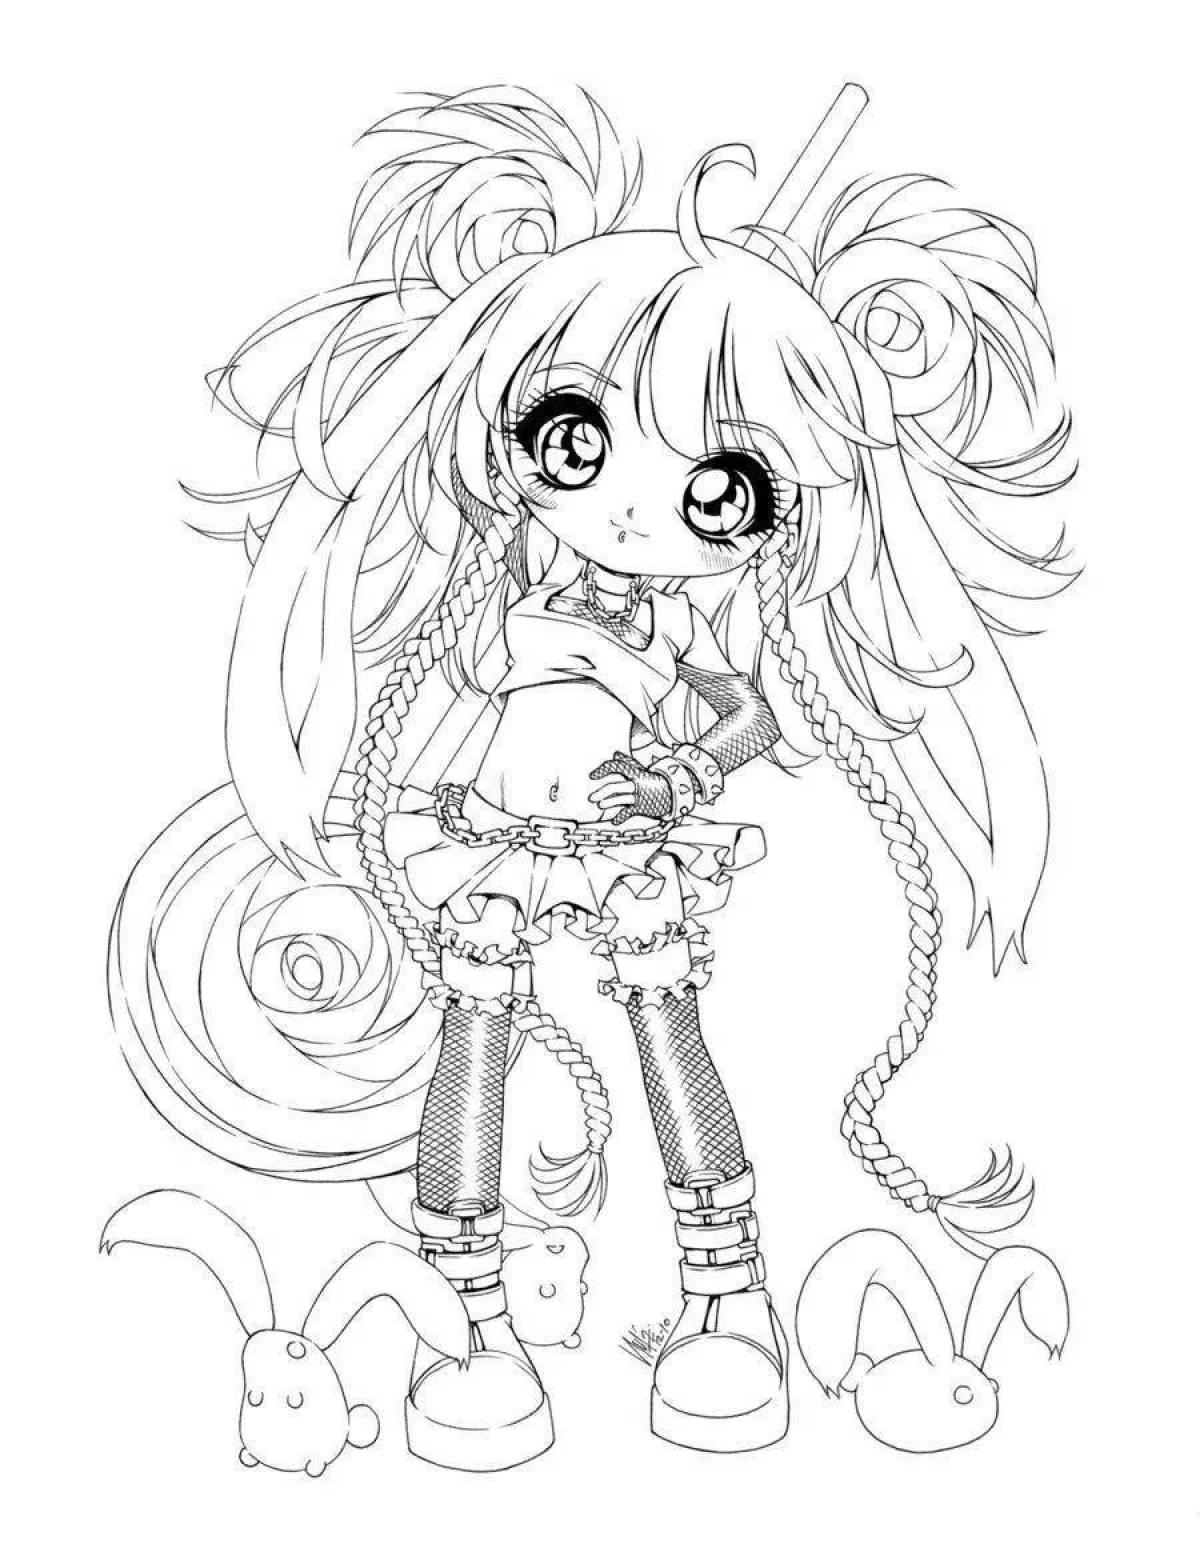 Bright anime cuties coloring pages